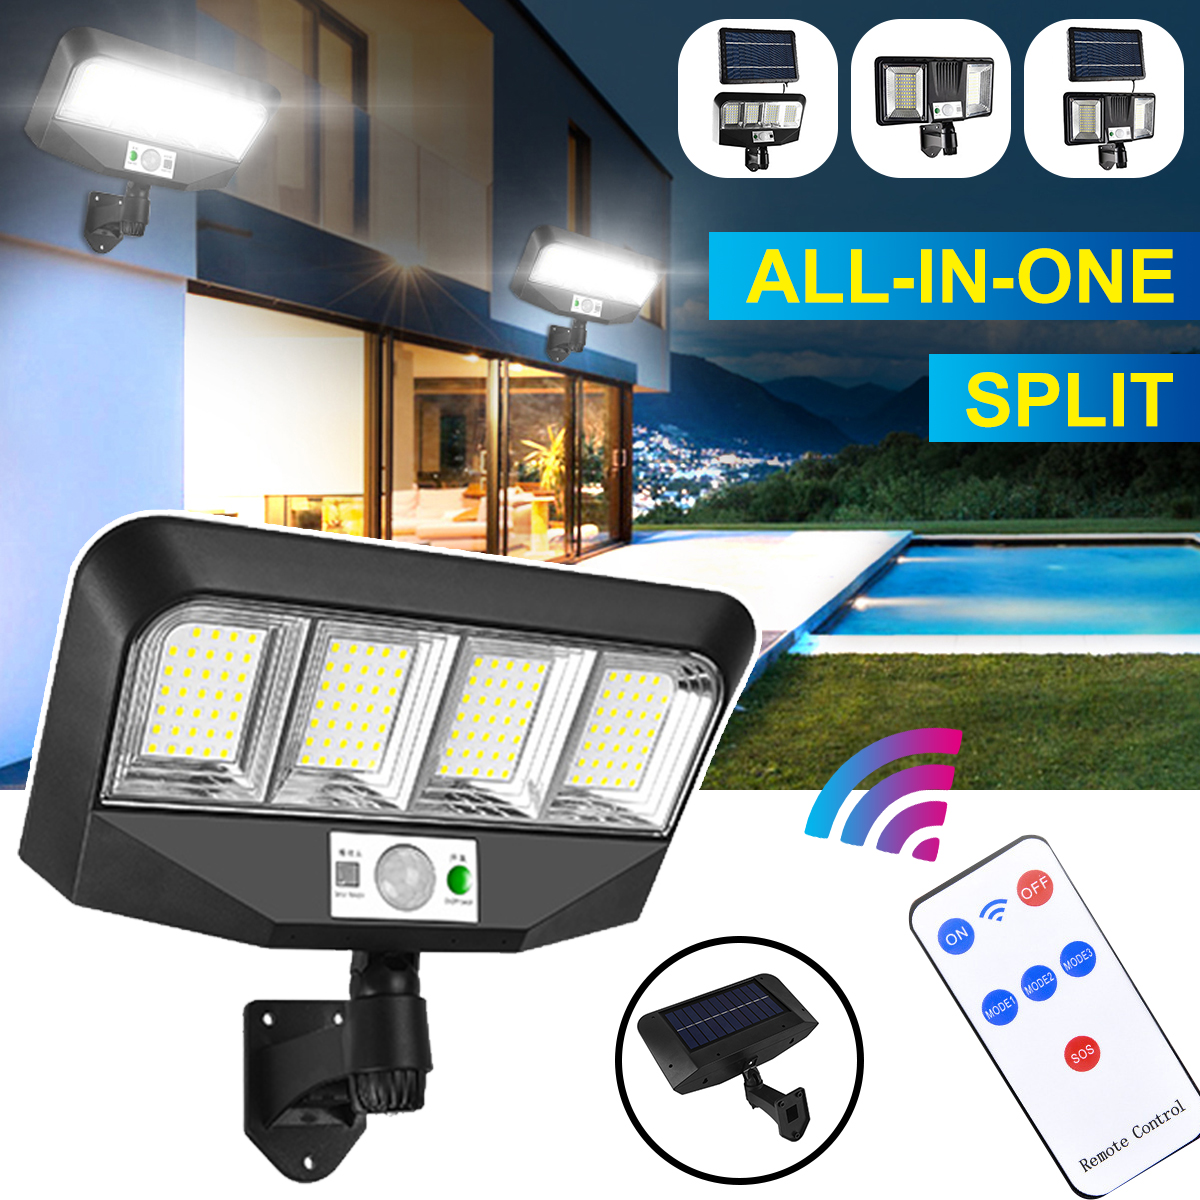 Solar-Lights-Split-Induction-Lights-with-Remote-Control-LED-Wall-Lights-Super-Bright-Outdoor-Camping-1897763-1